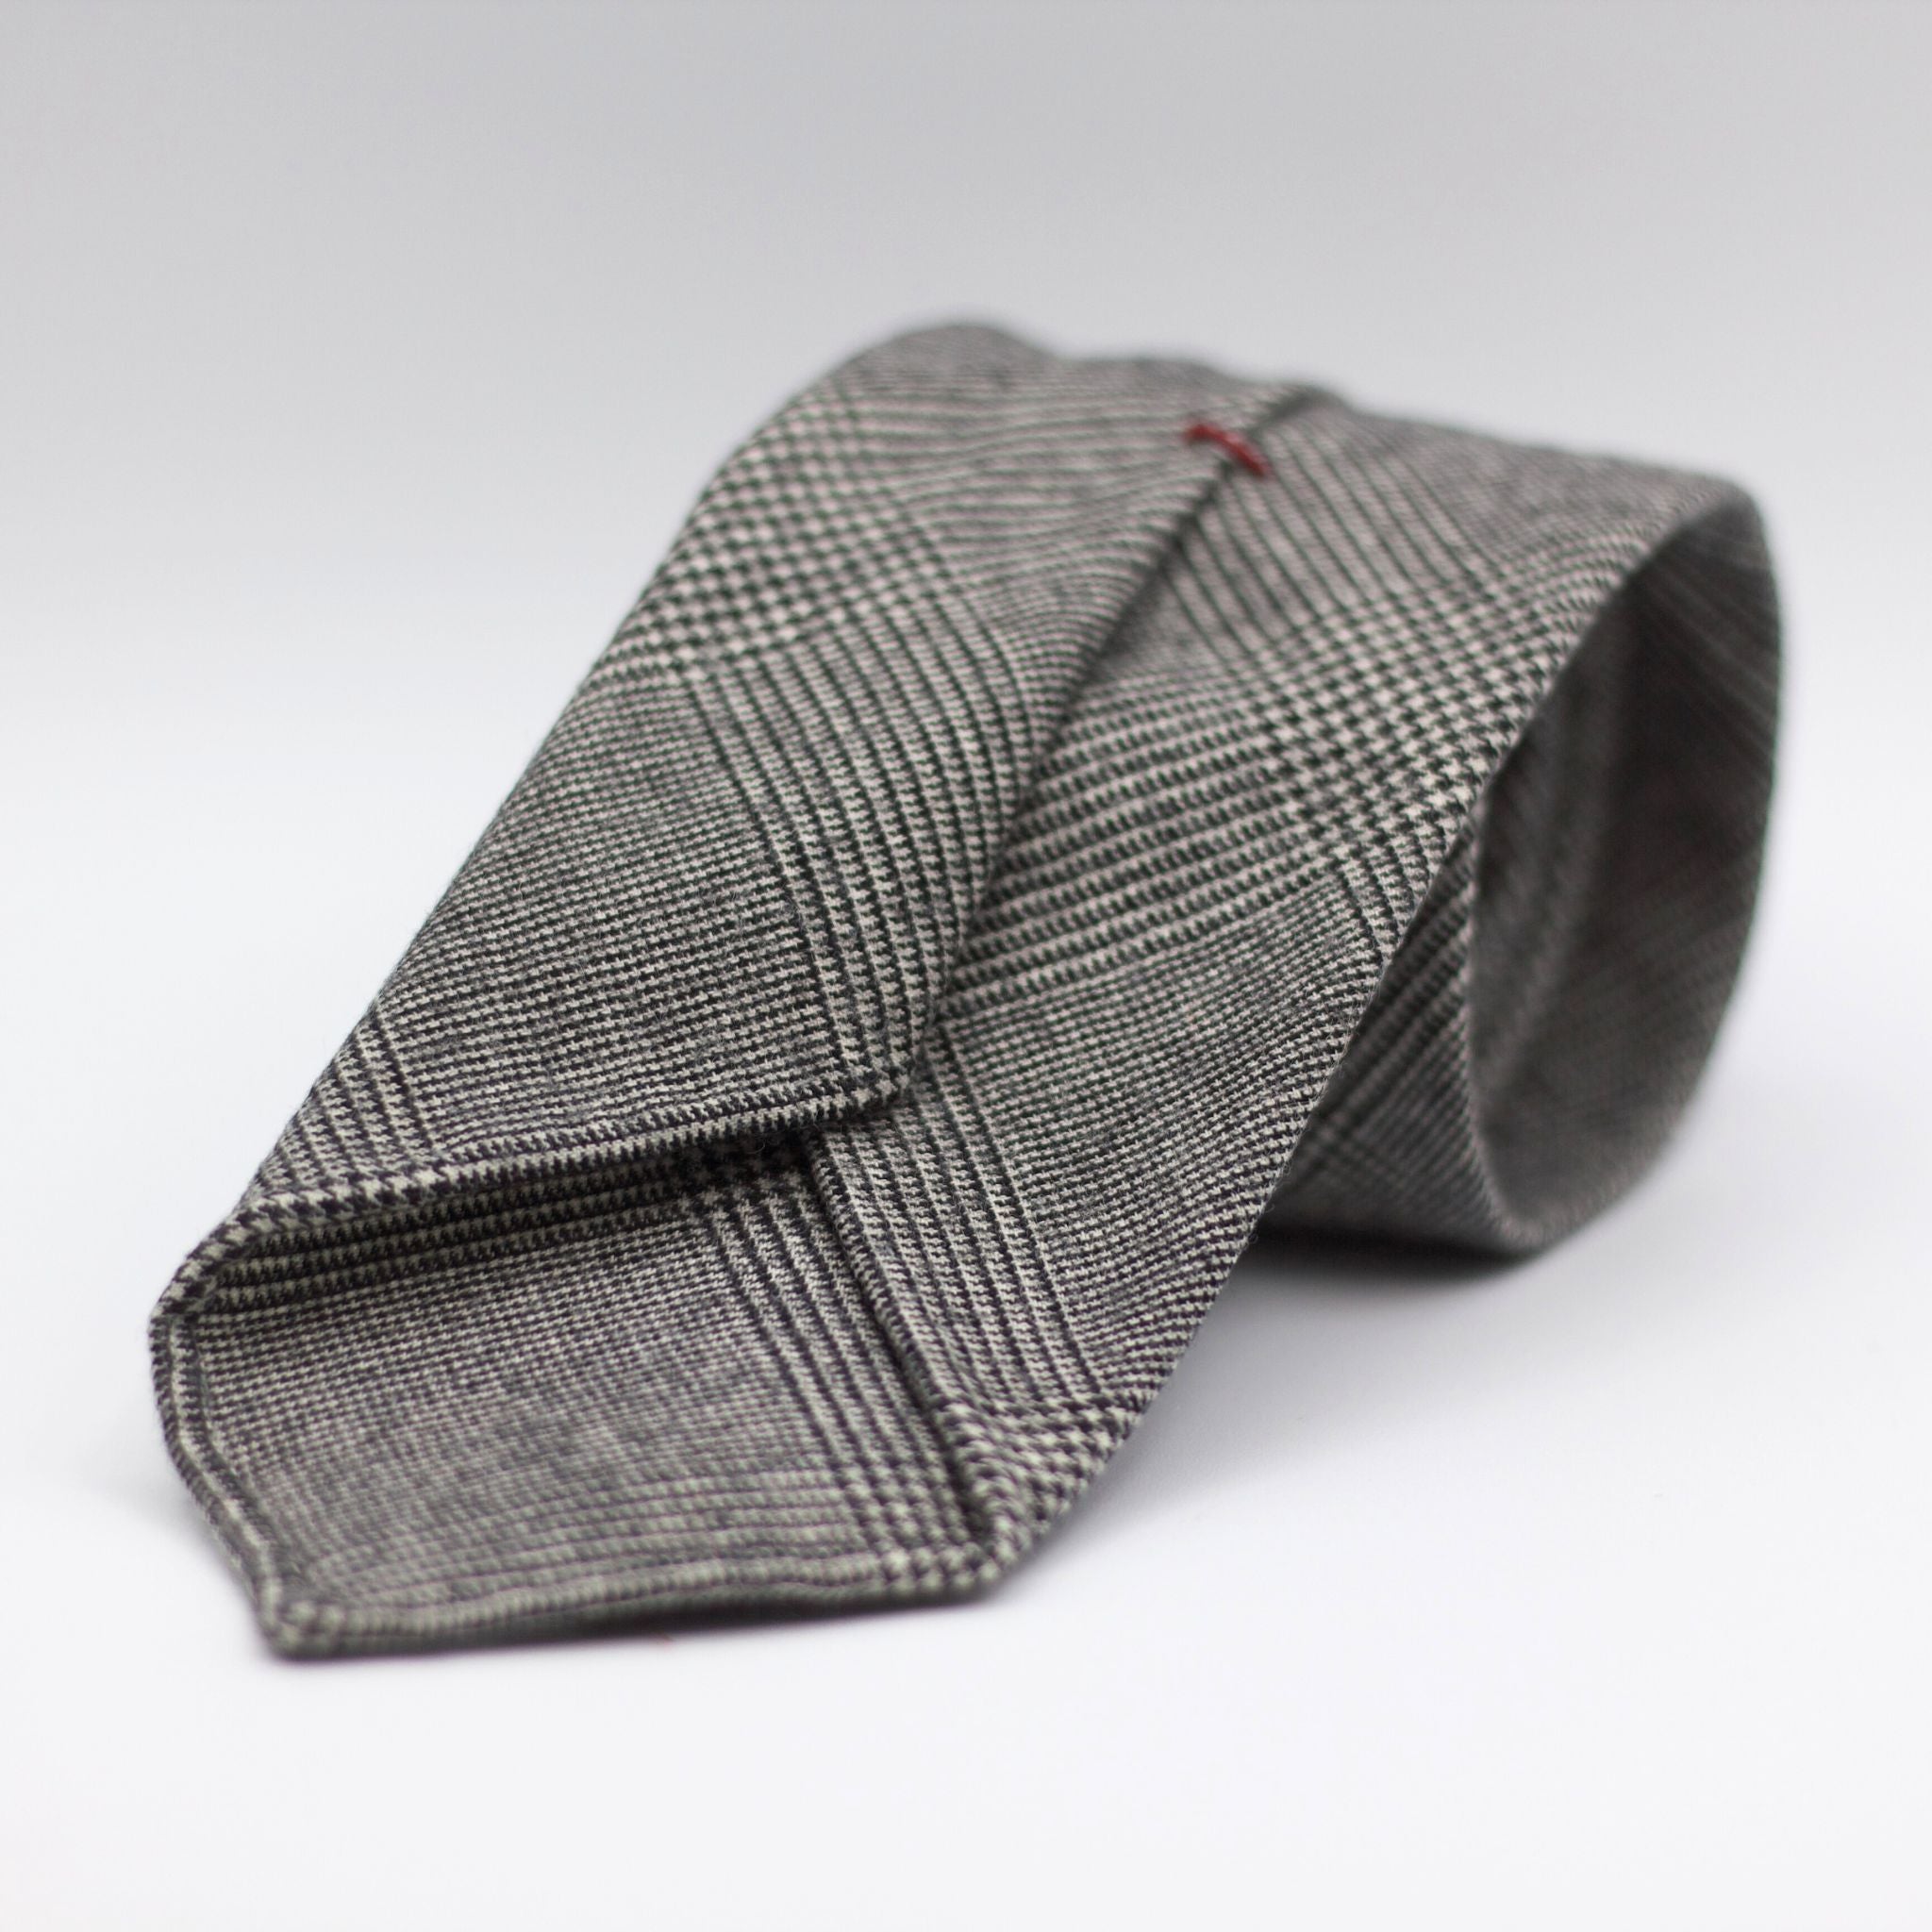 Cruciani & Bella 100% Wool Flannel Unlined Hand rolled blades Grey and Black Prince of Wales Tie  Handmade in Italy 8 cm x 150 cm